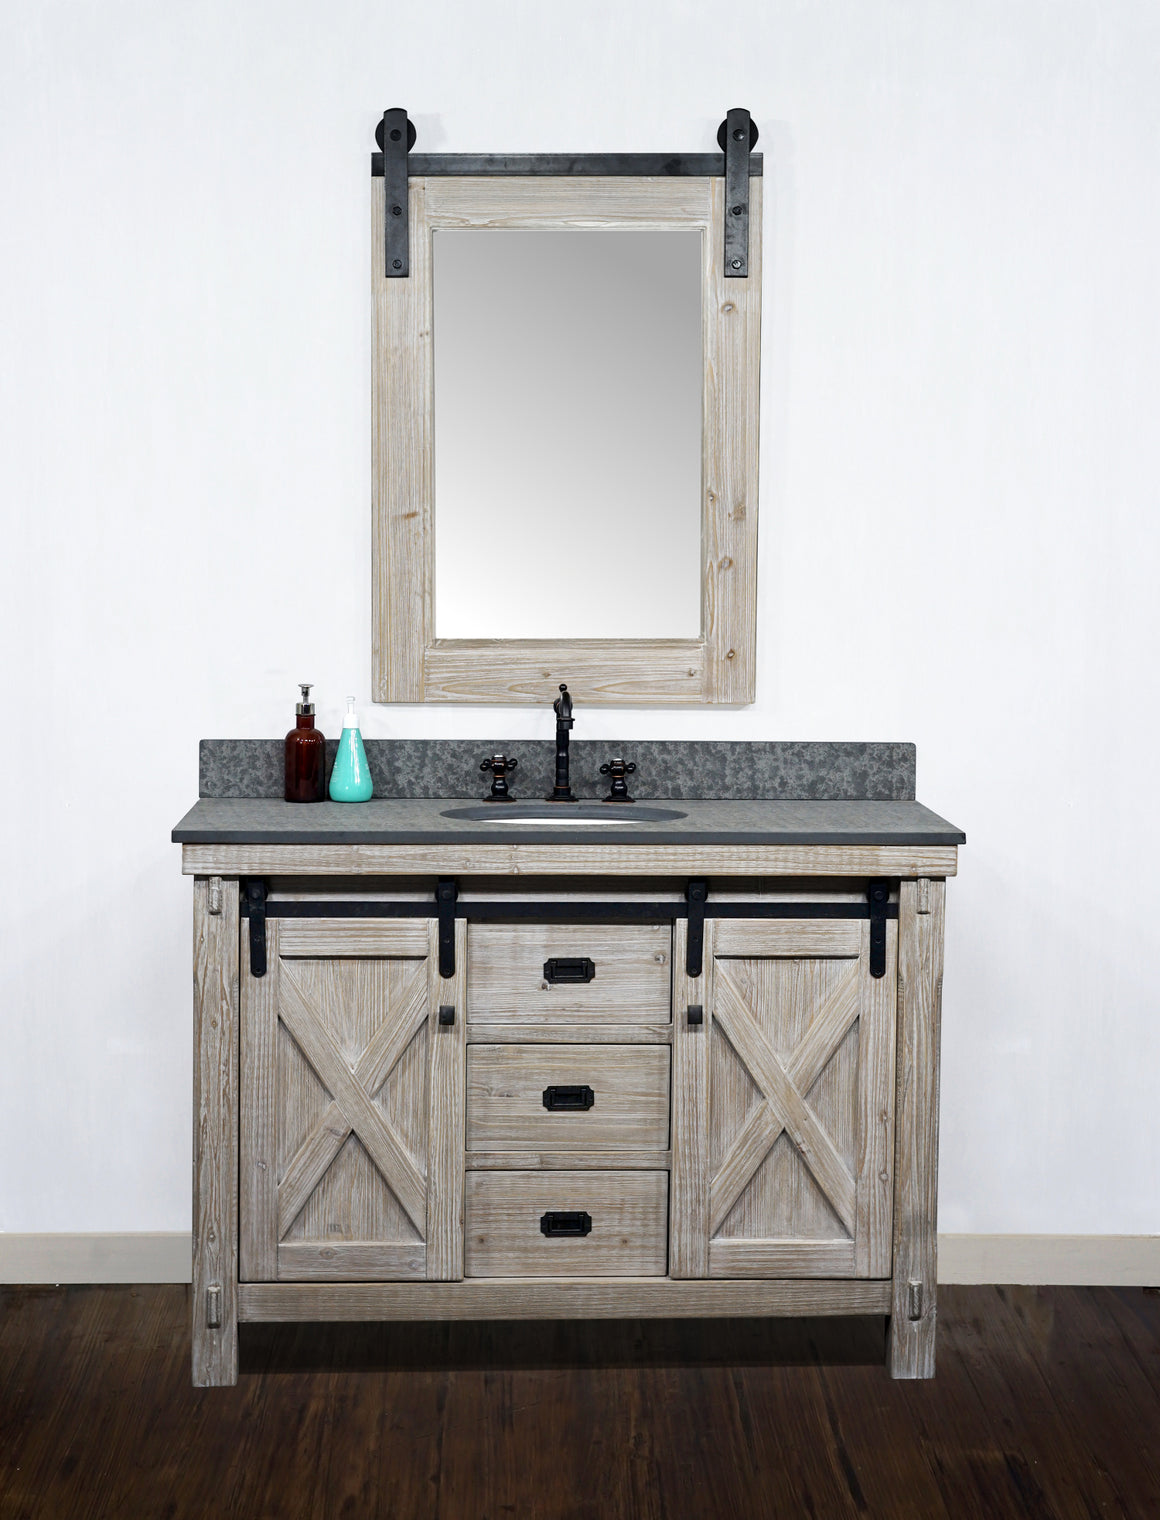 48"RUSTIC SOLID FIR BARN DOOR STYLE SINGLE SINK VANITY WITH RUSTIC STYLE POLISHED TEXTURED SURFACE GRANITE TOP IN MATTE GREY-NO FAUCET